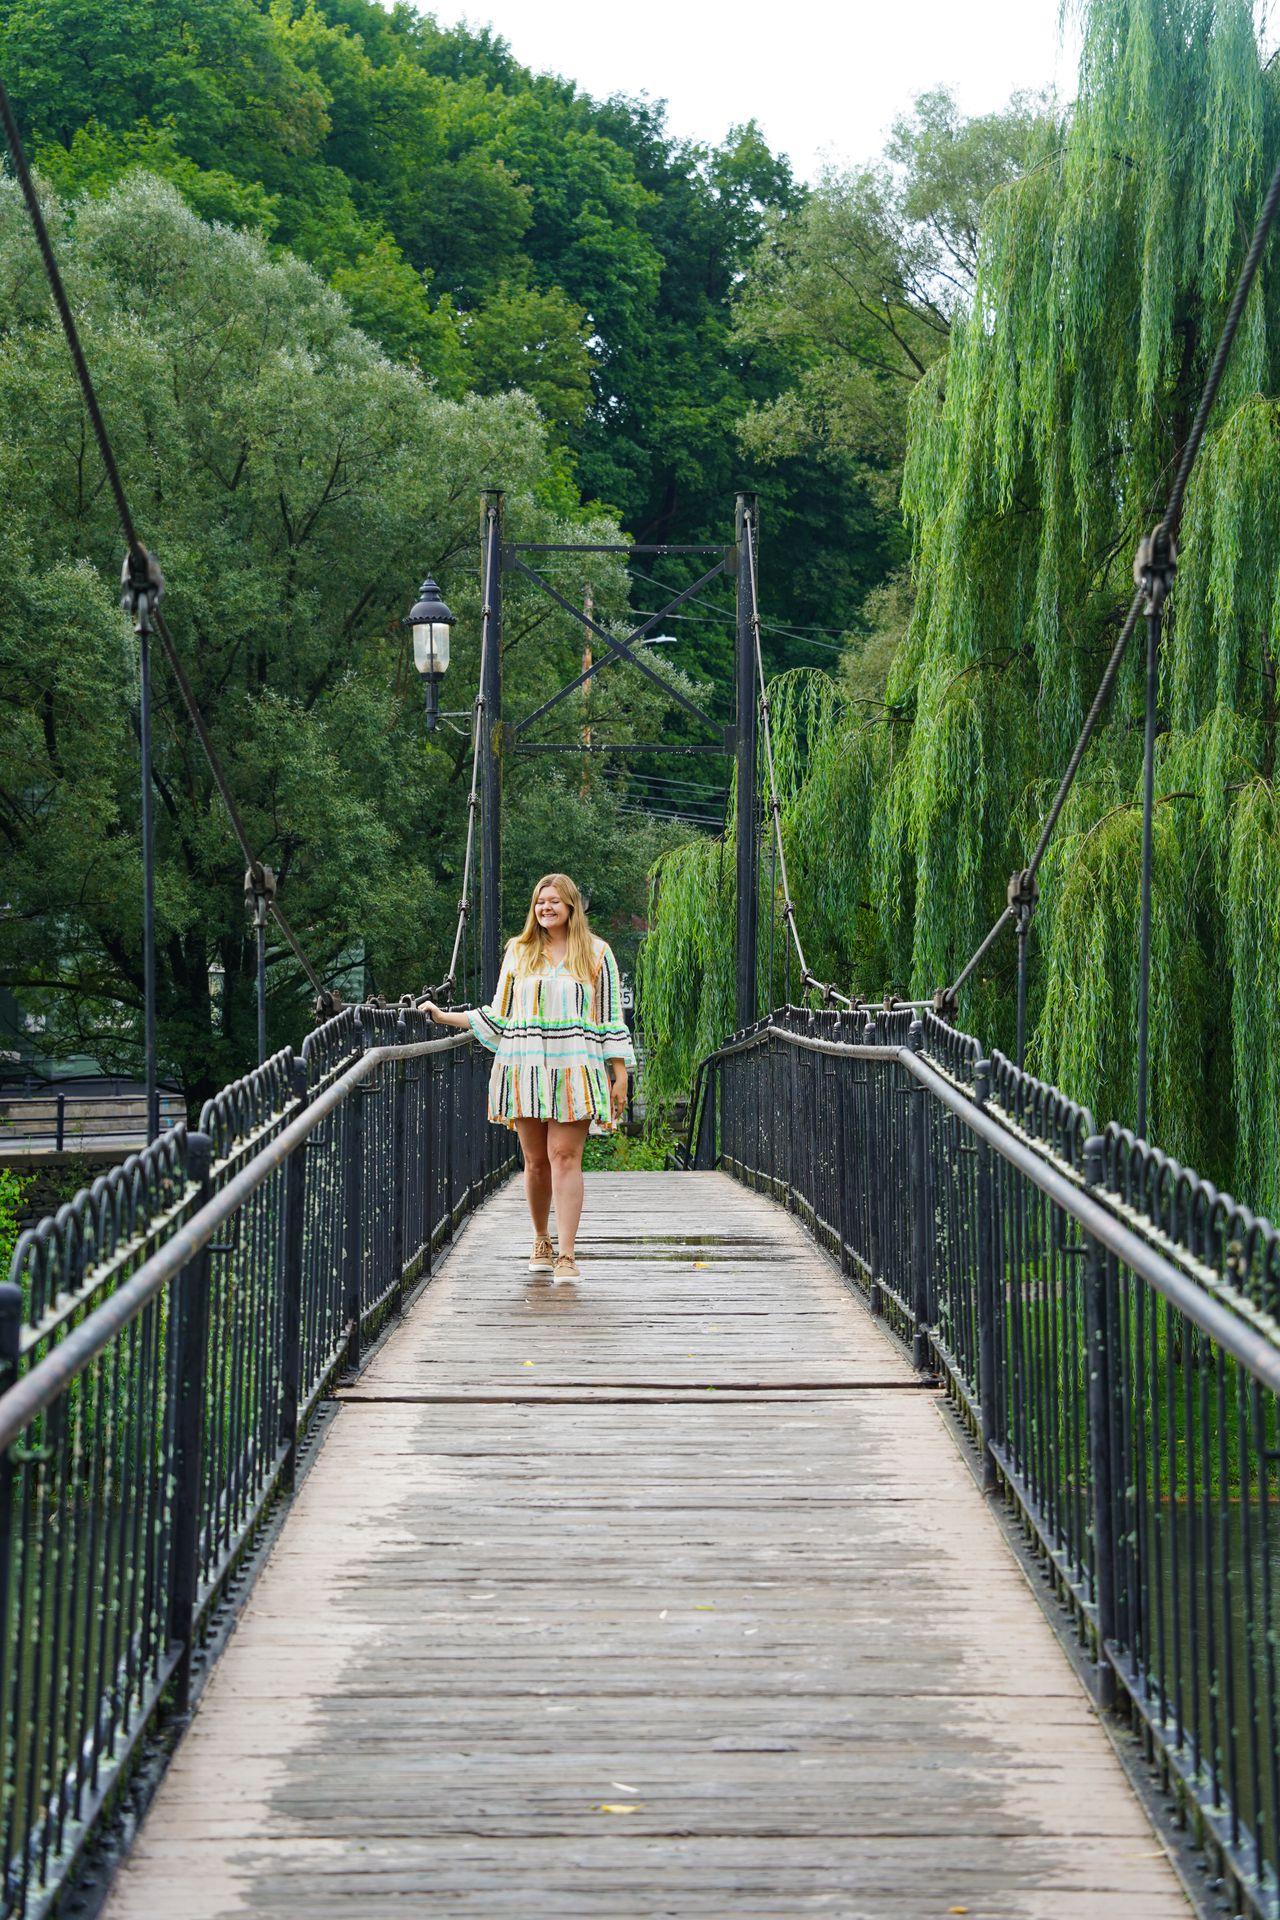 Lydia crossing a bridge in Talleyrand Park. There are trees with hanging moss in the background.